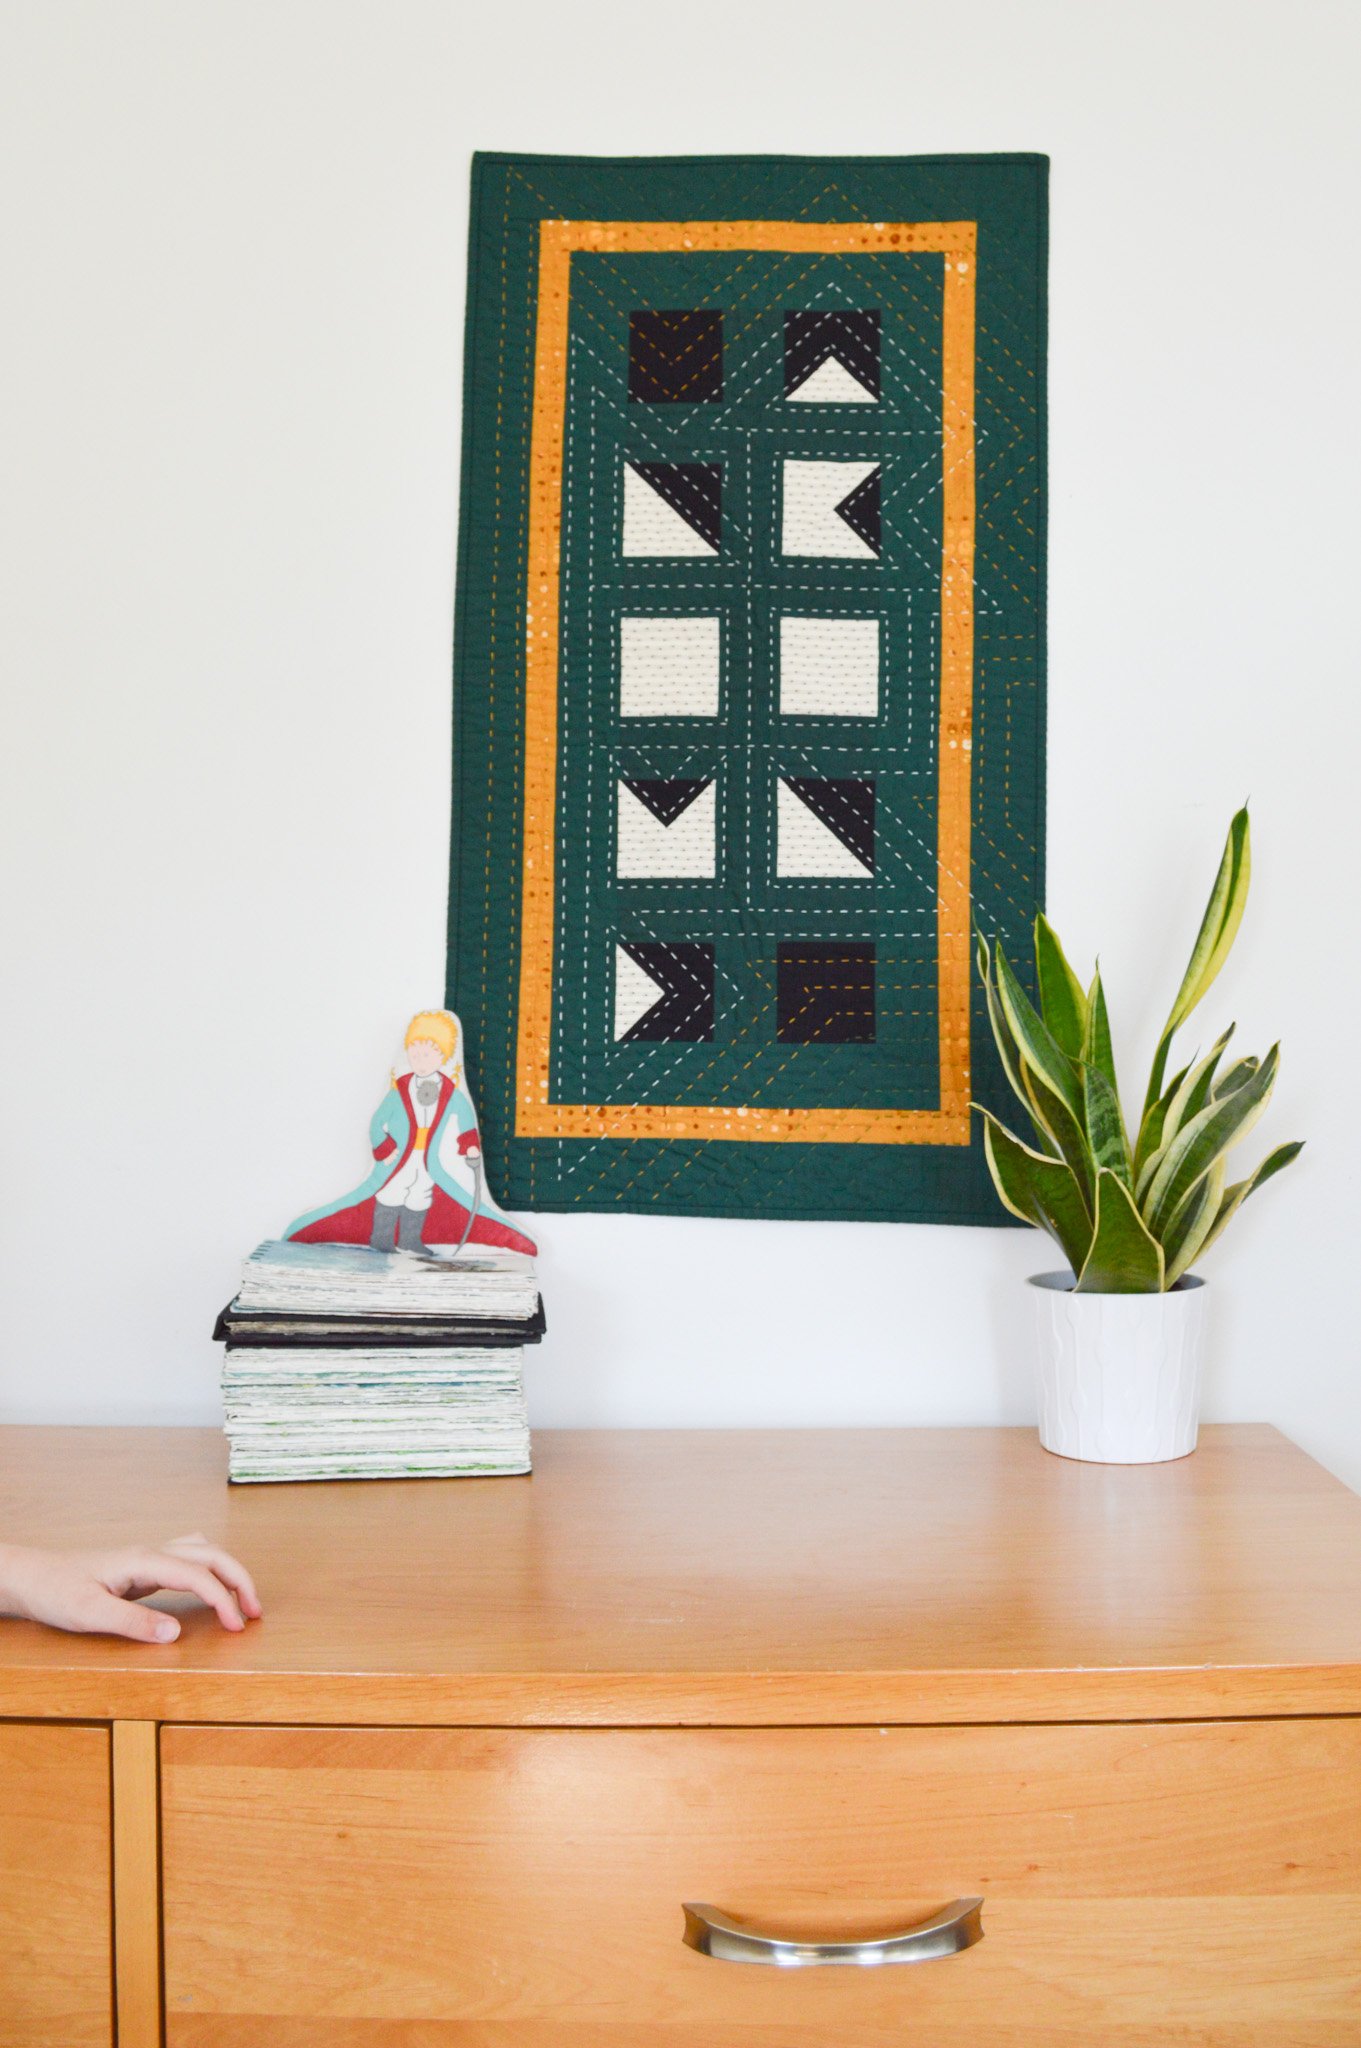  A green wall haning that is hand-quilted hanging above a modern style dresser  